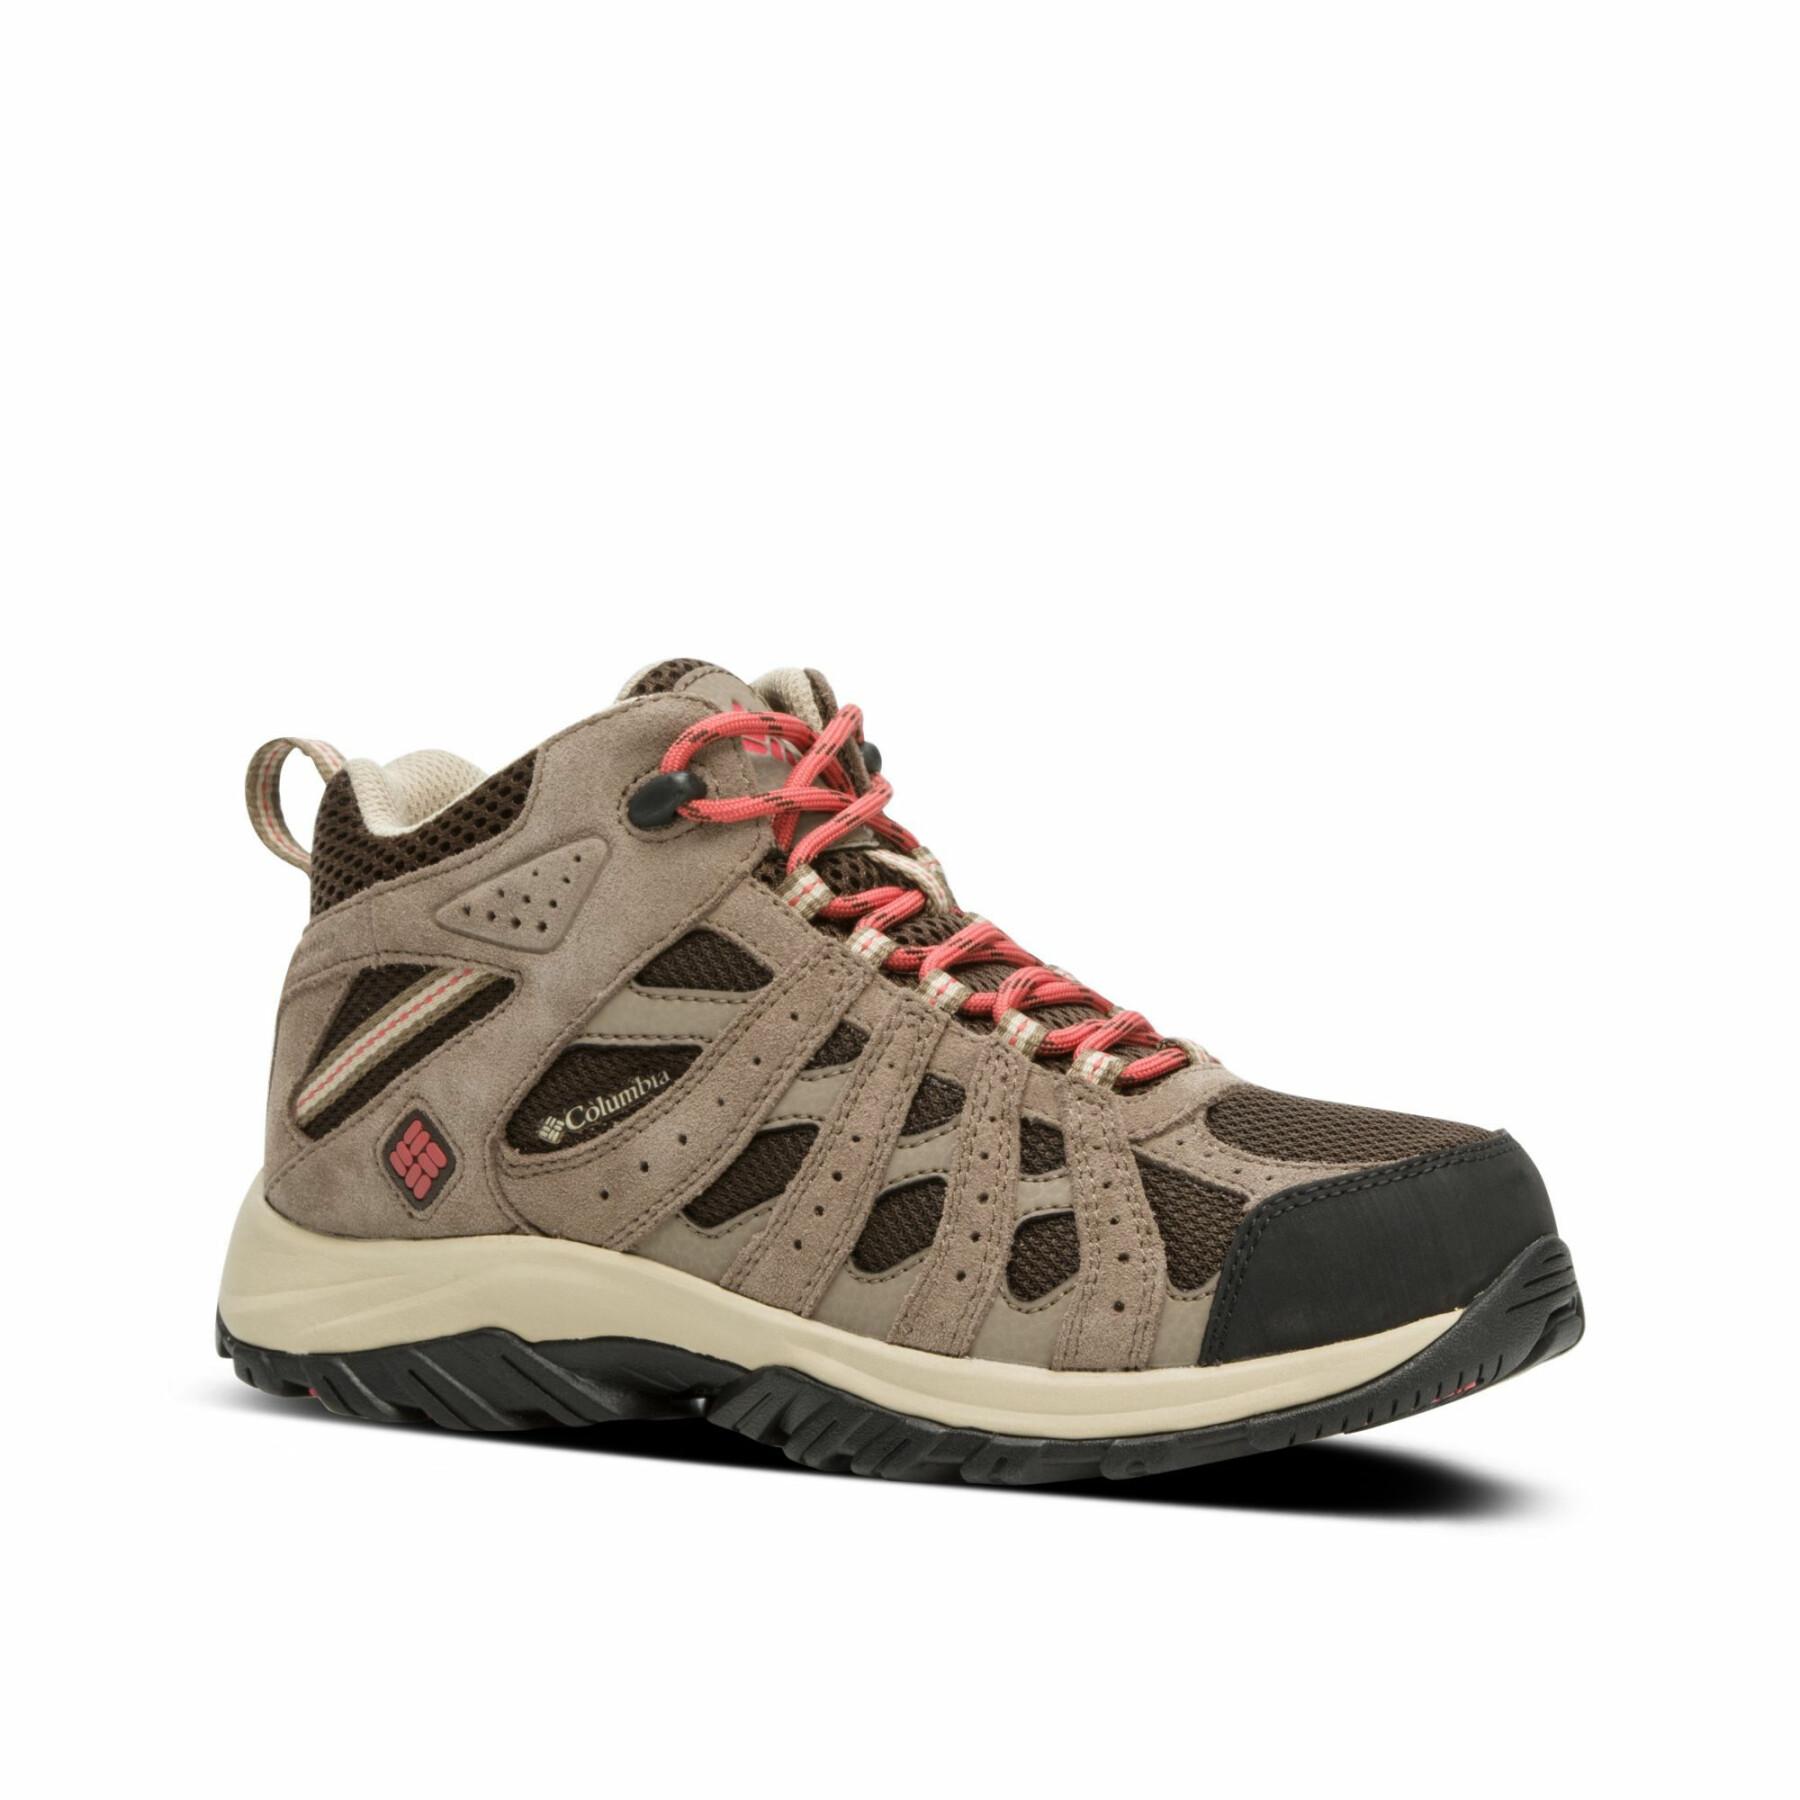 Chaussures femme Columbia Canyon Point Mid